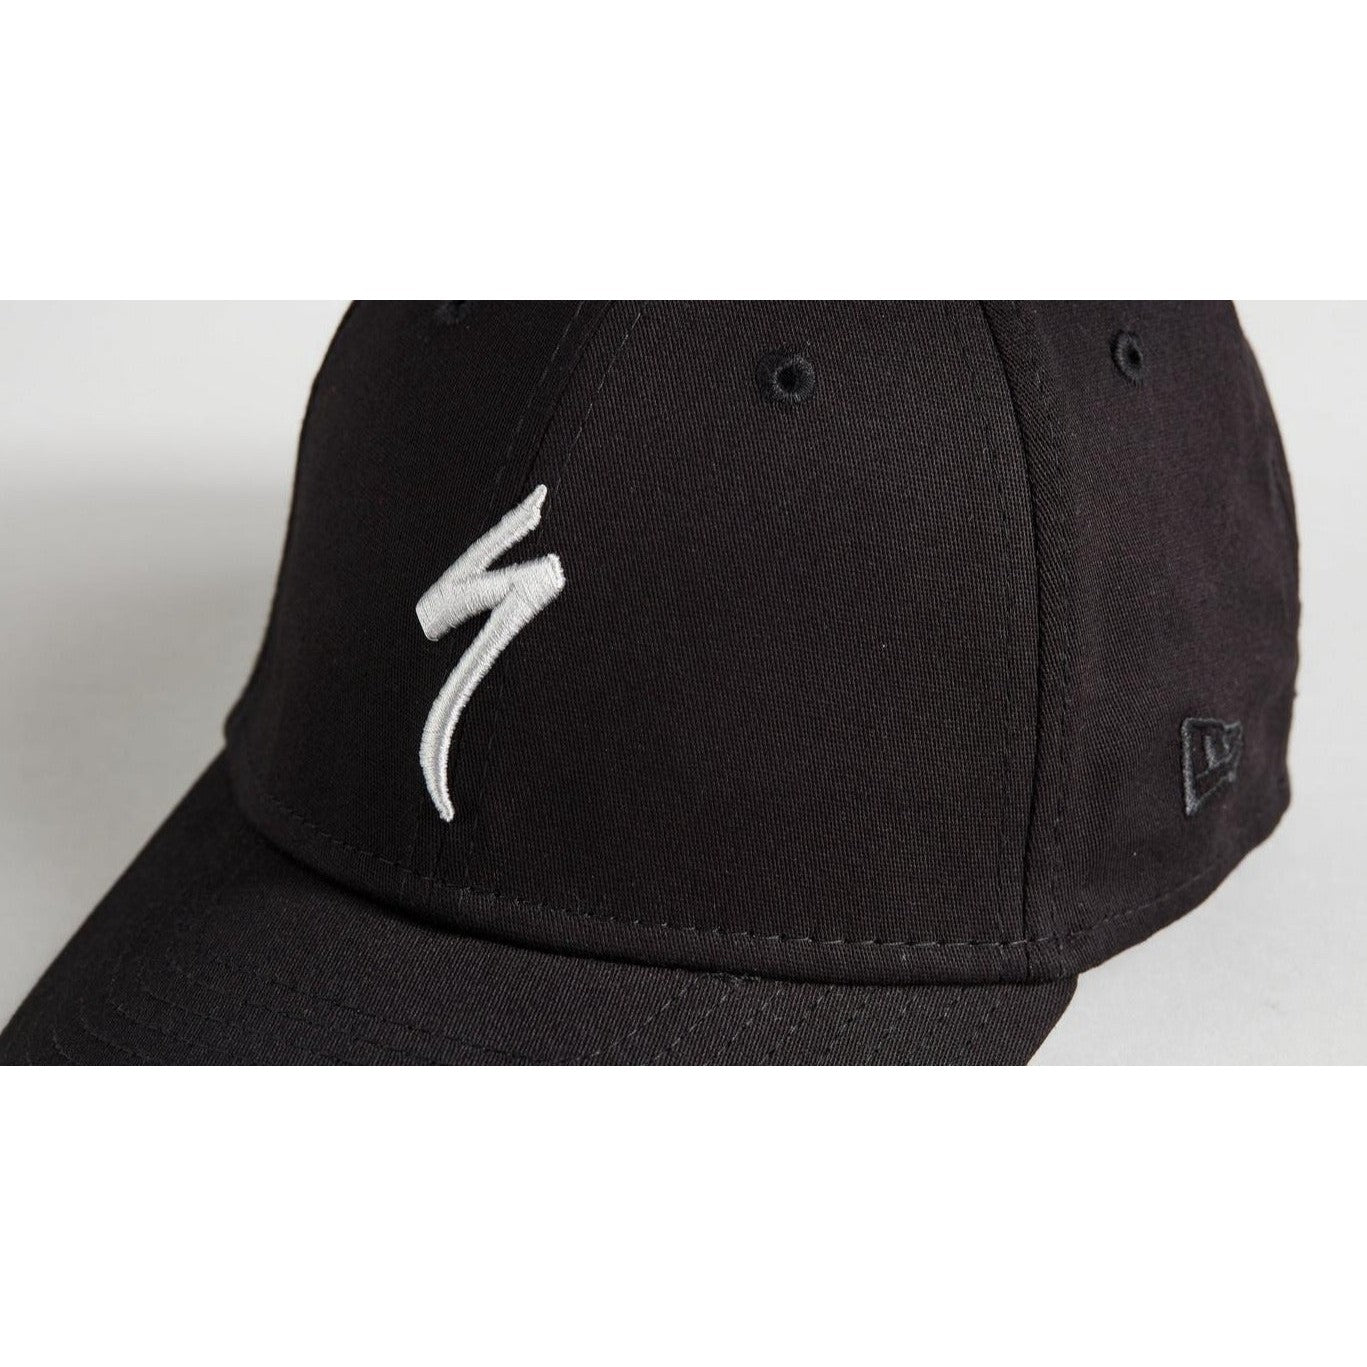 Specialized Youth New Era S-Logo Hat - Headwear - Bicycle Warehouse